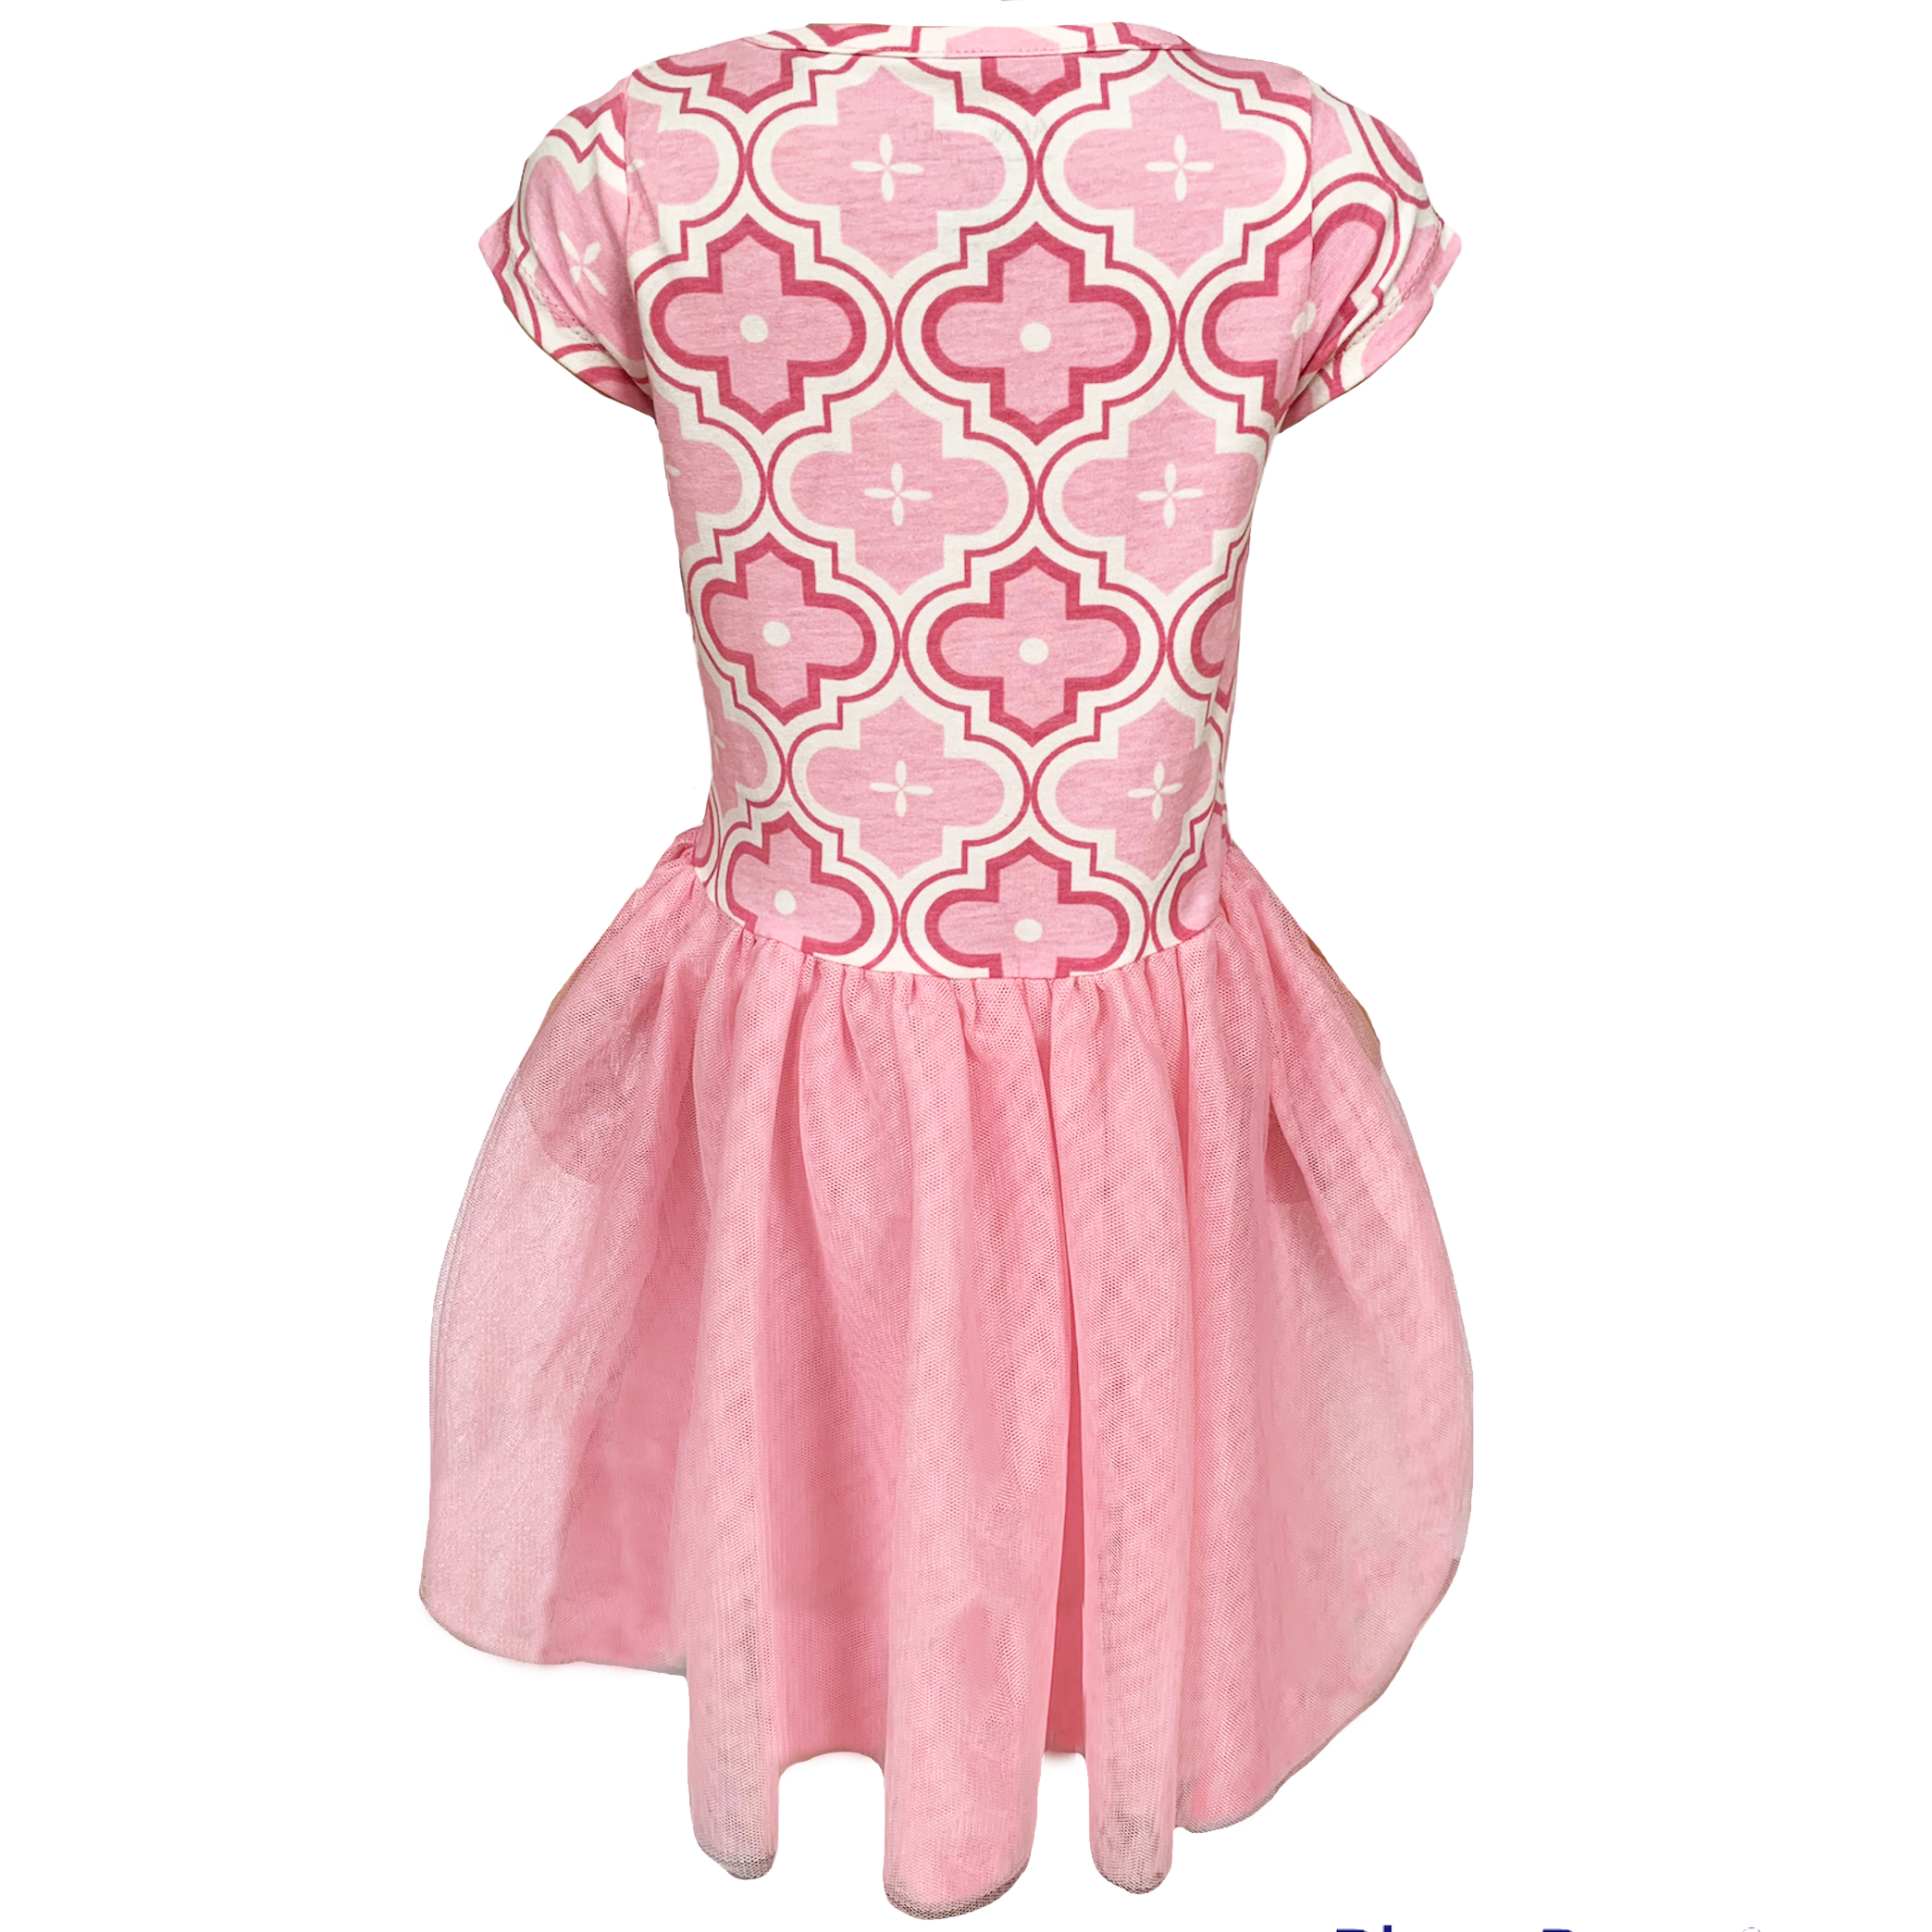 Girls Dress Pink Tulle & Pink Arabesque Easter Party Dress